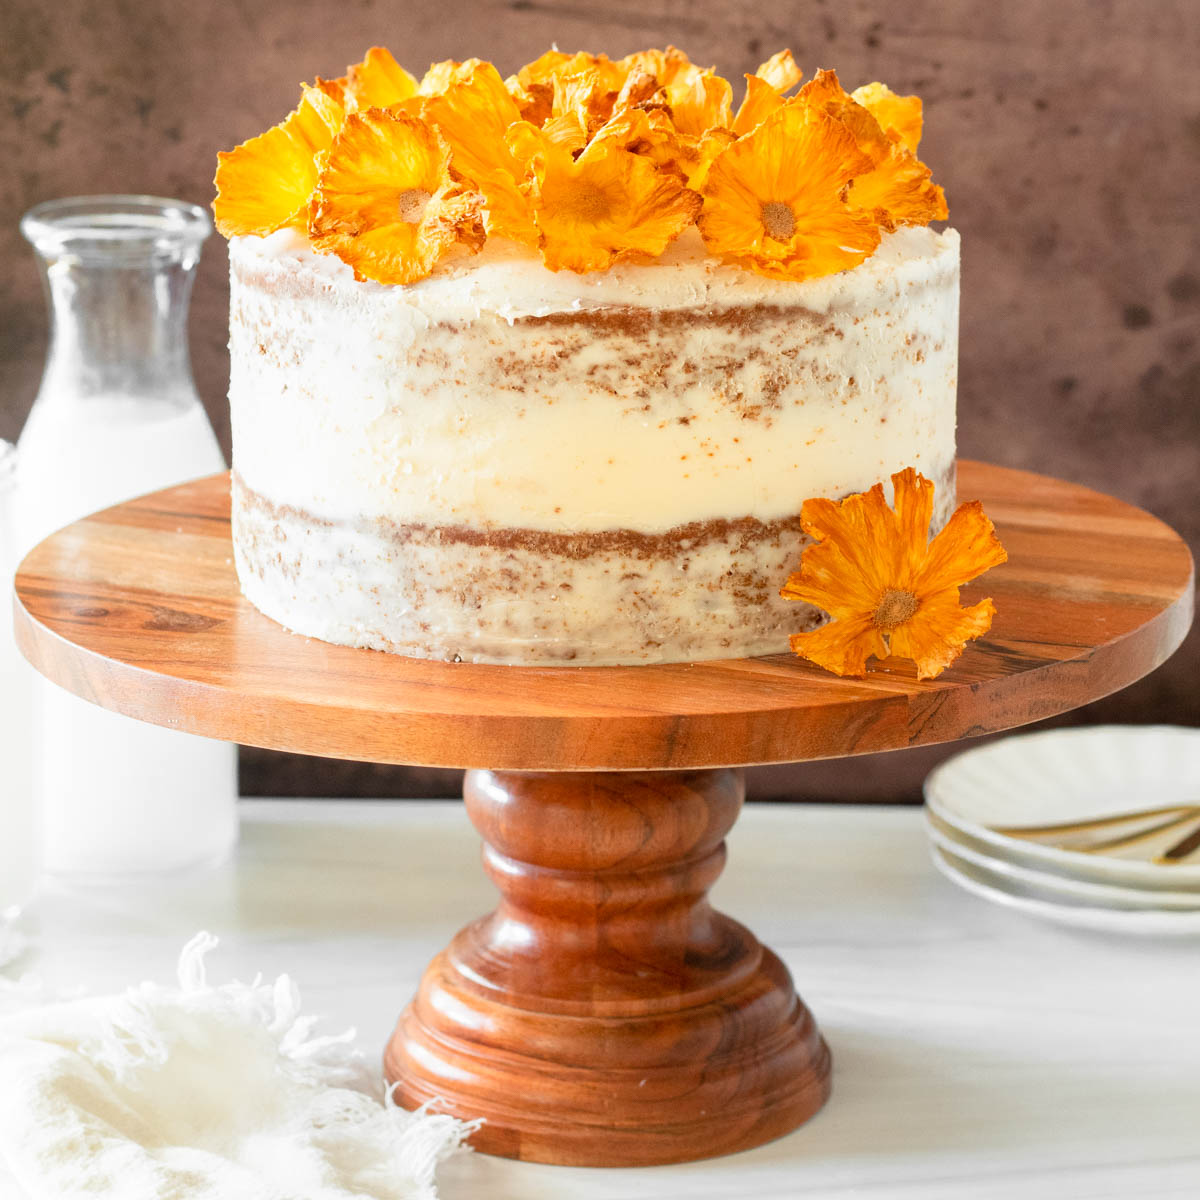 This hummingbird cake is delicious tropical banana-pineapple cake filled with crushed pineapple, overripe bananas, walnuts, and cinnamon topped with a buttercream frosting.